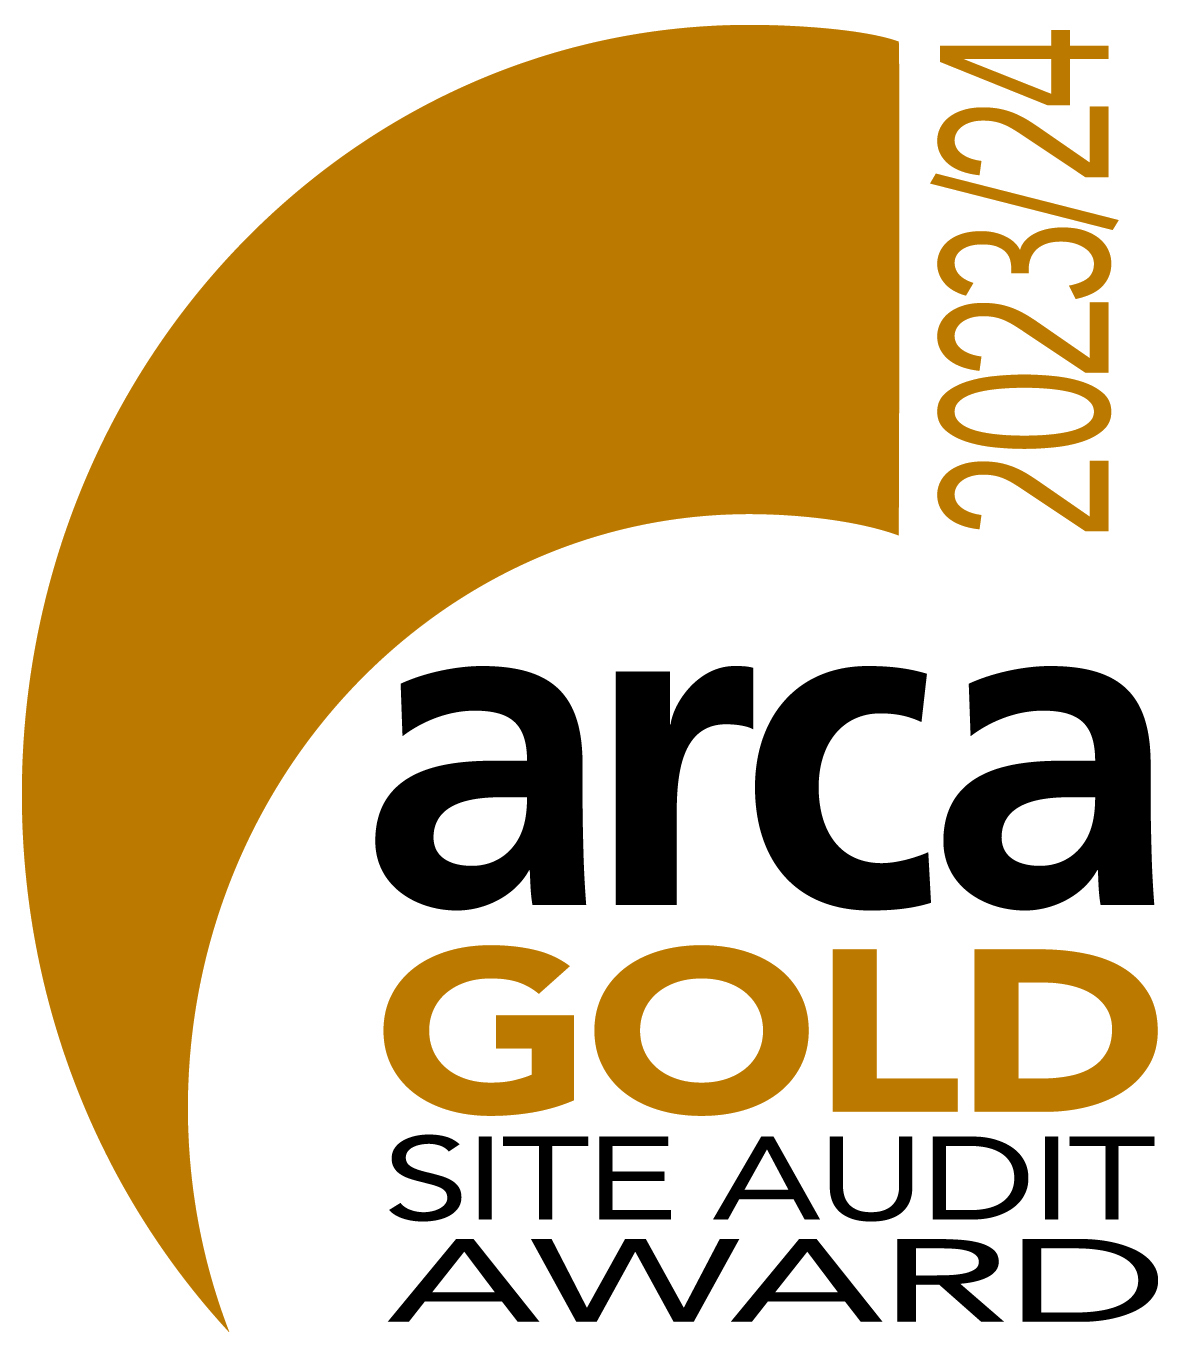 ARCA Gold Site Audit Award 2023/2024 awarded on 10th Oct 2023